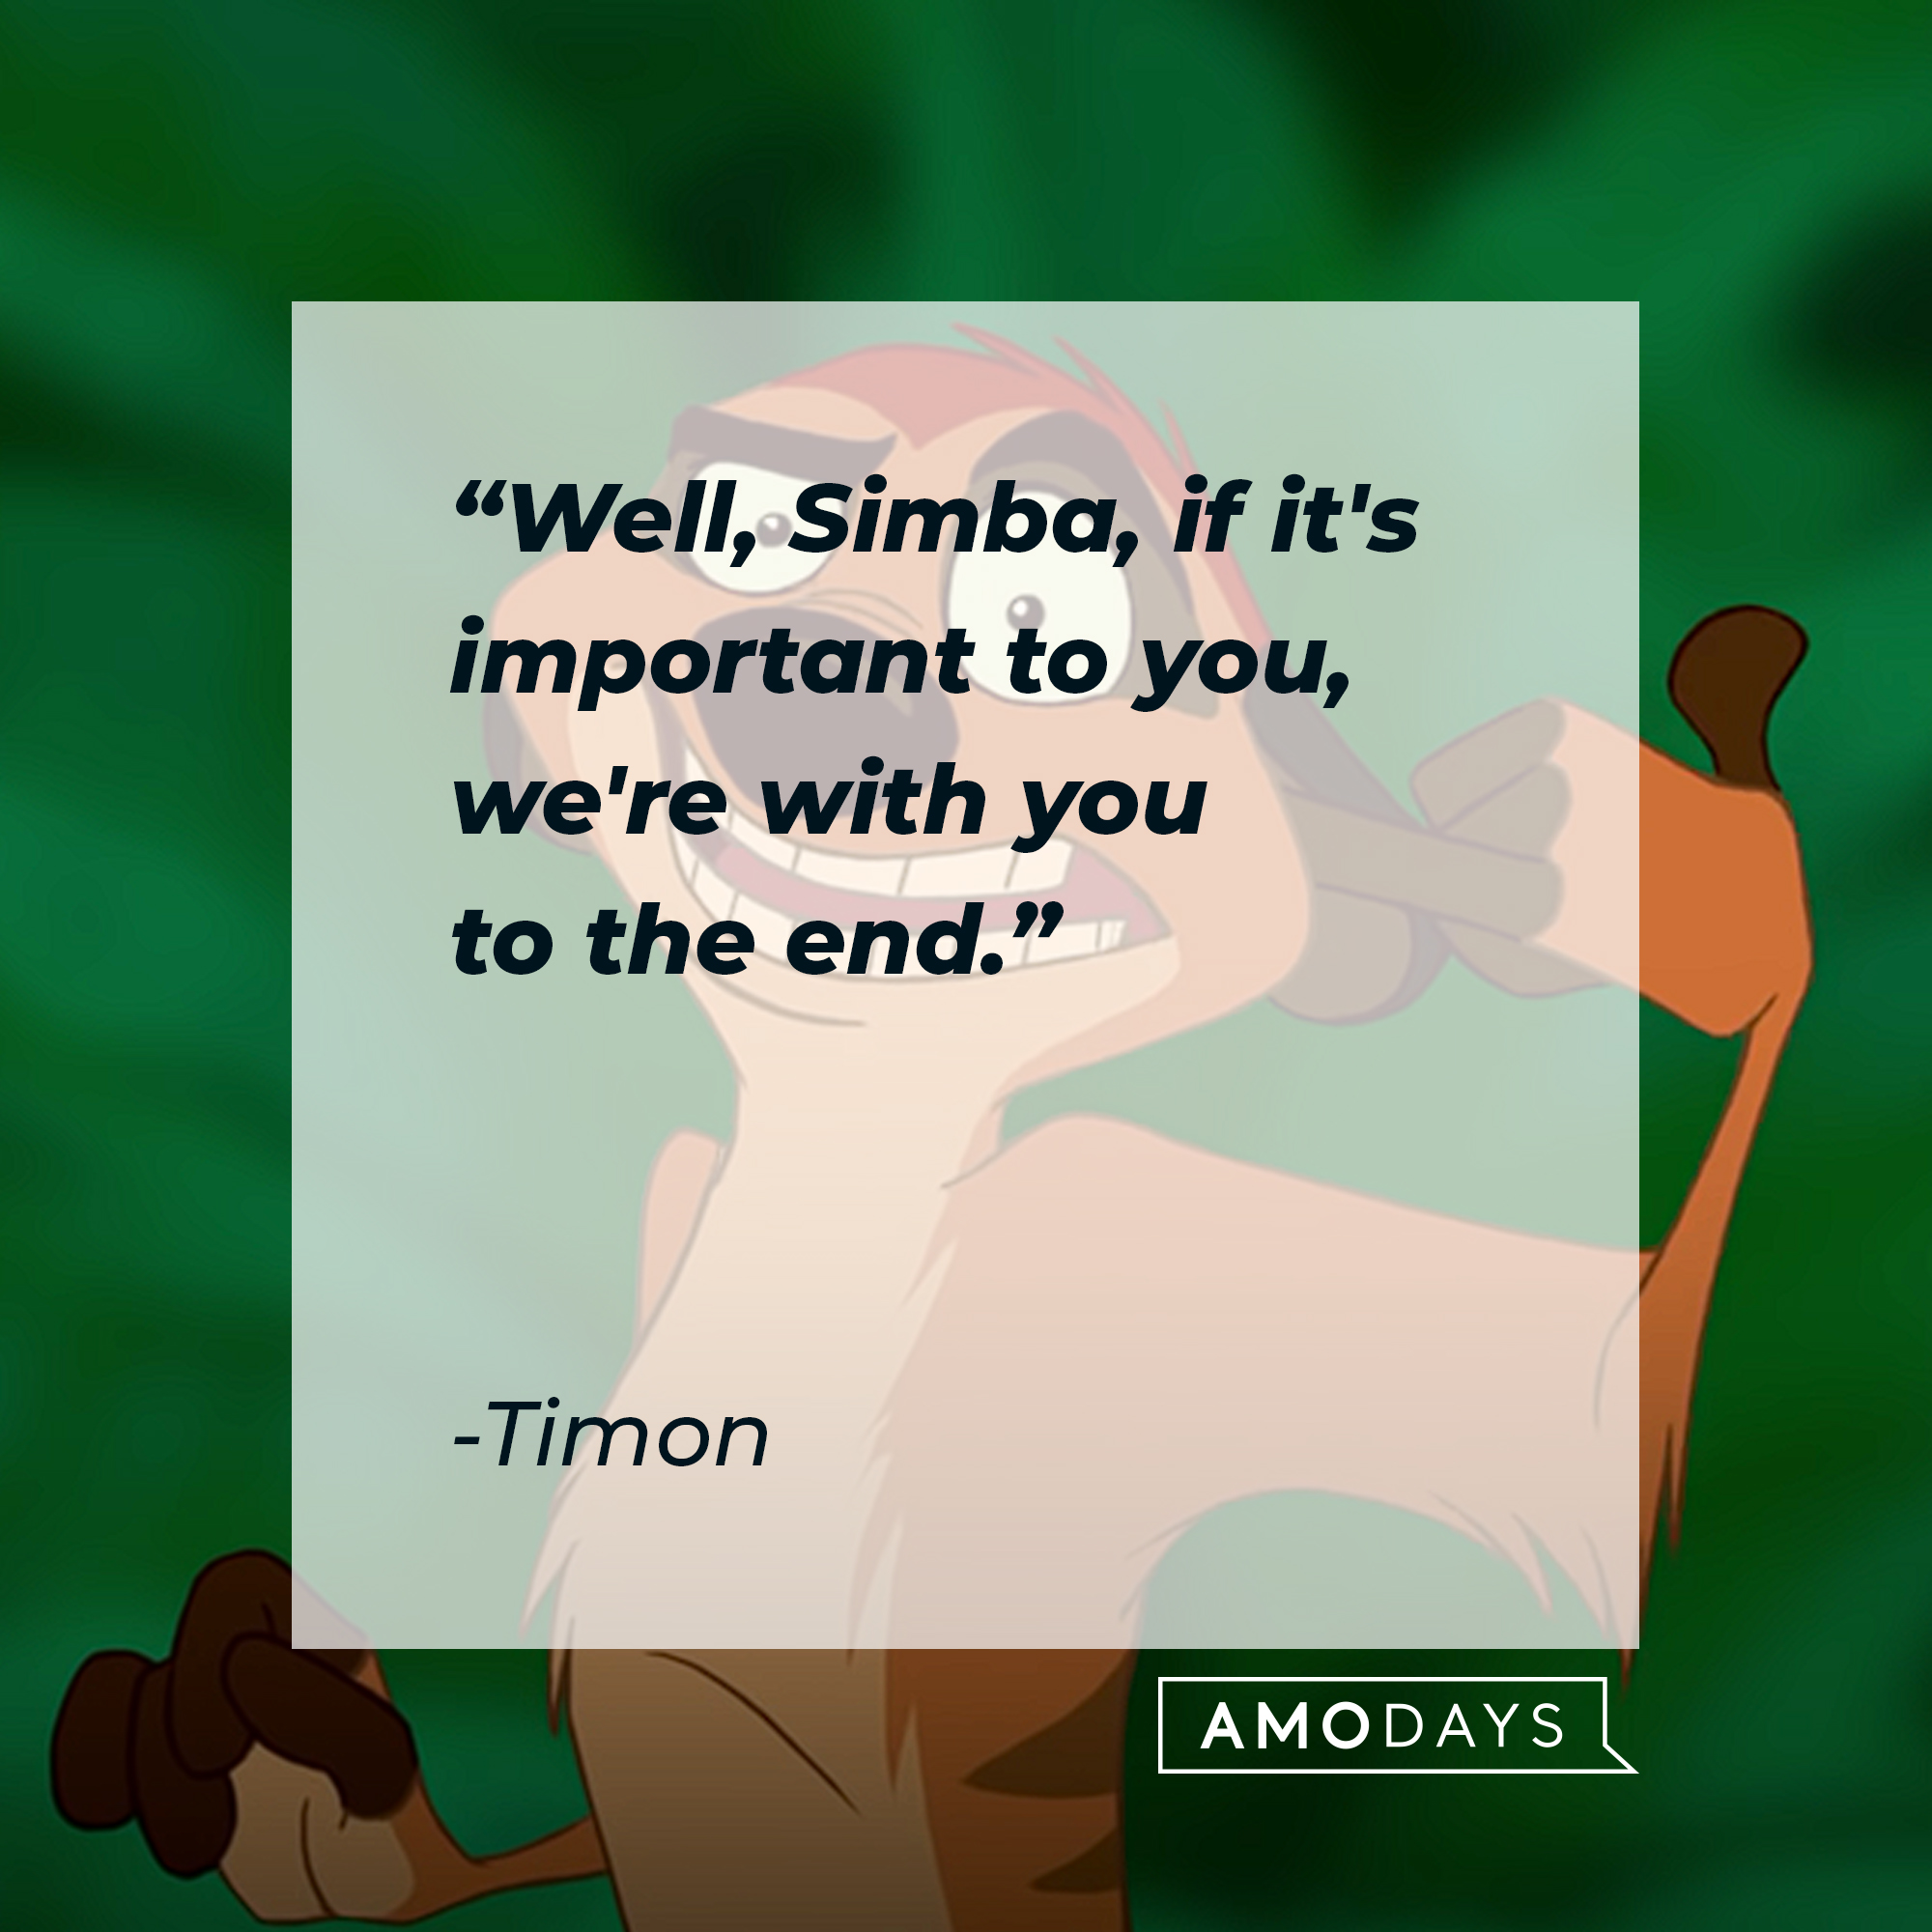 Timon, with his quote: “Well, Simba, if it's important to you, we're with you to the end.” | Source: youtube.com/disneyfr